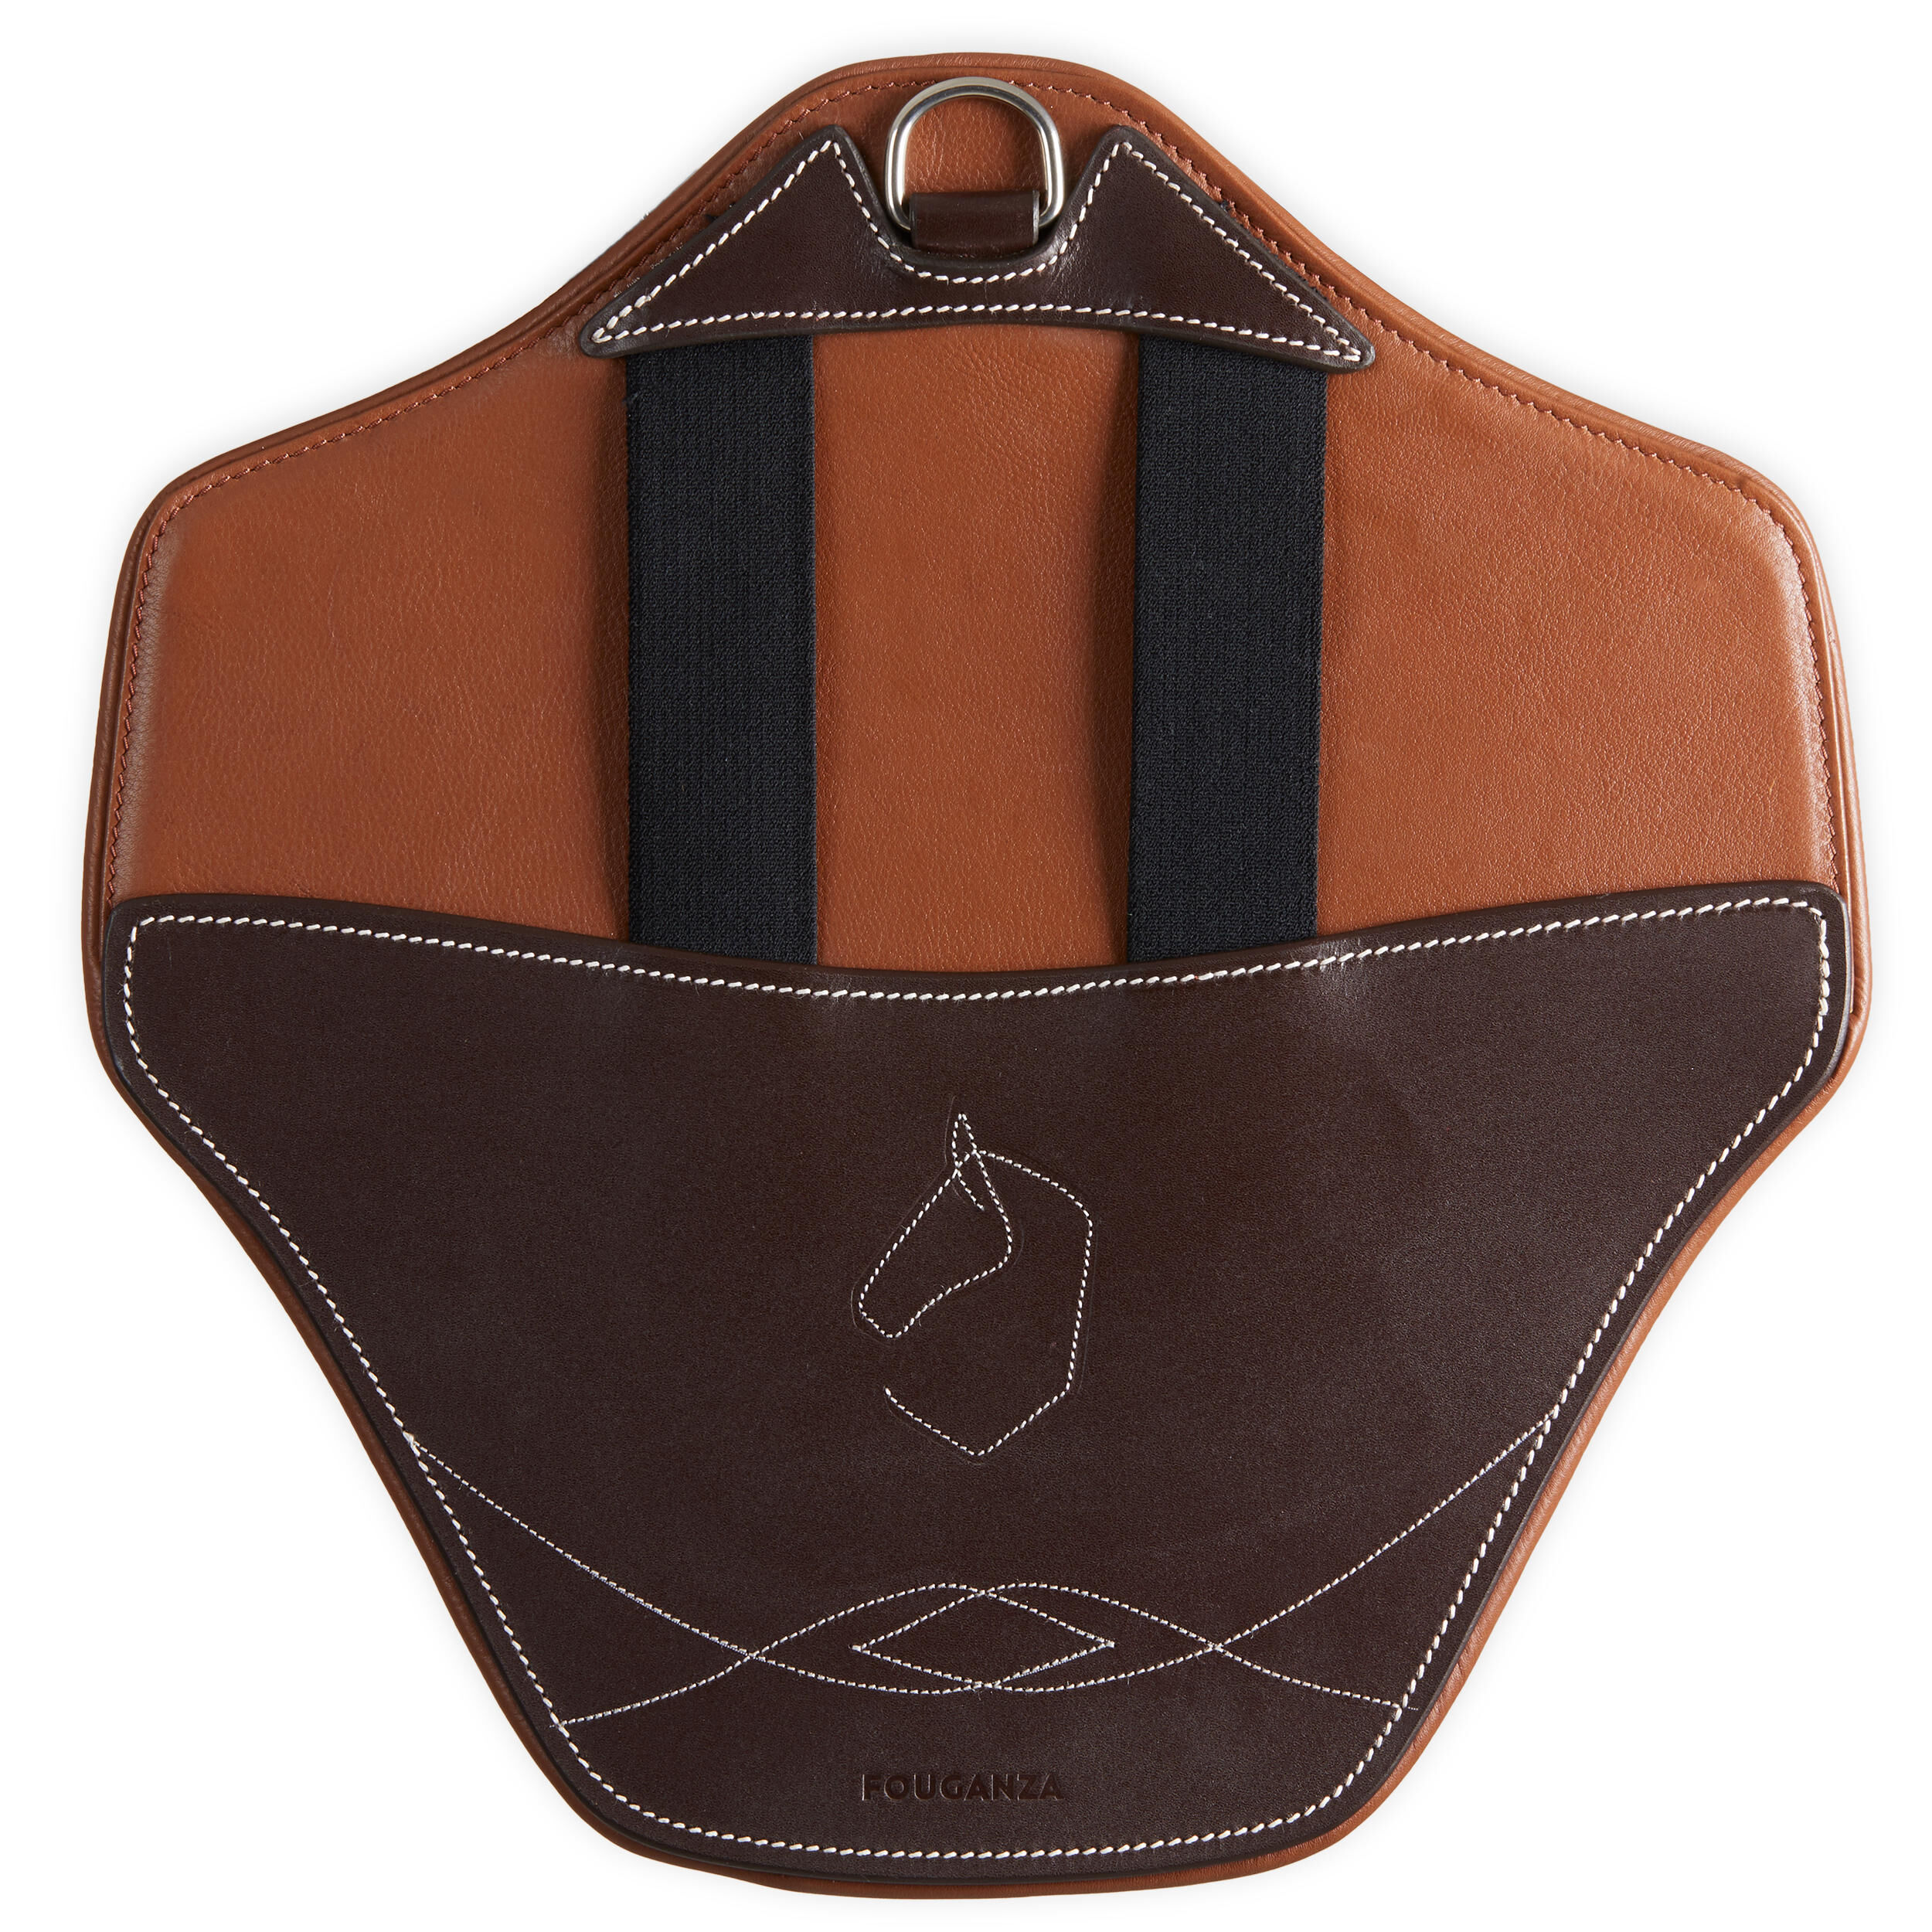 FOUGANZA Removable Pony Size Stud Guard 500 - Brown